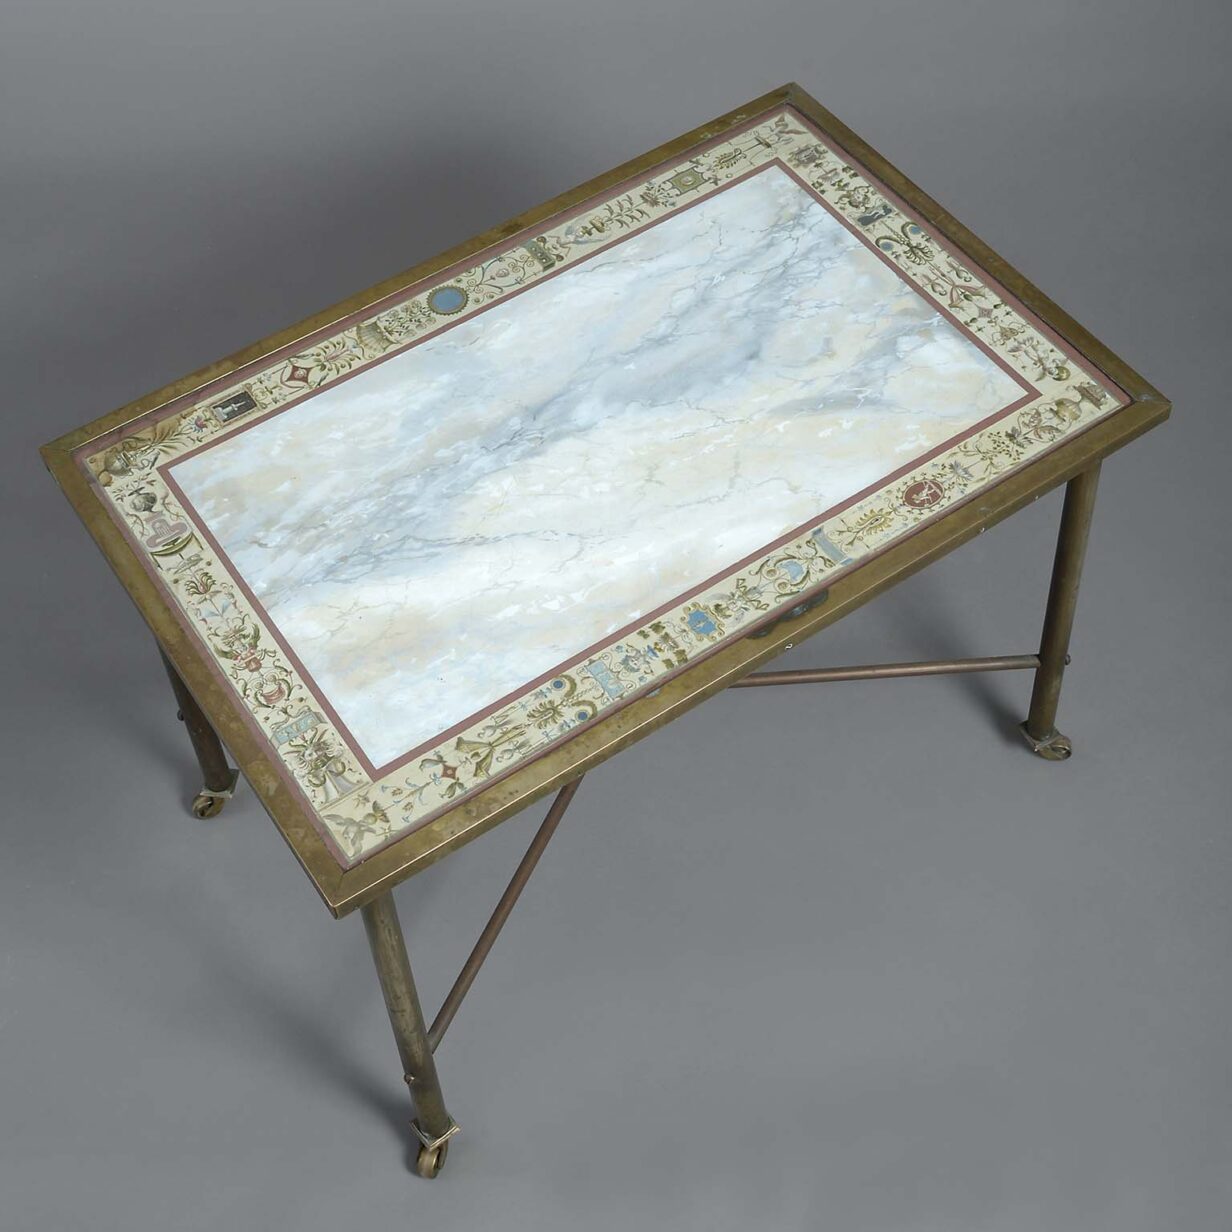 Mid-20th century brass low table with faux marble painted top